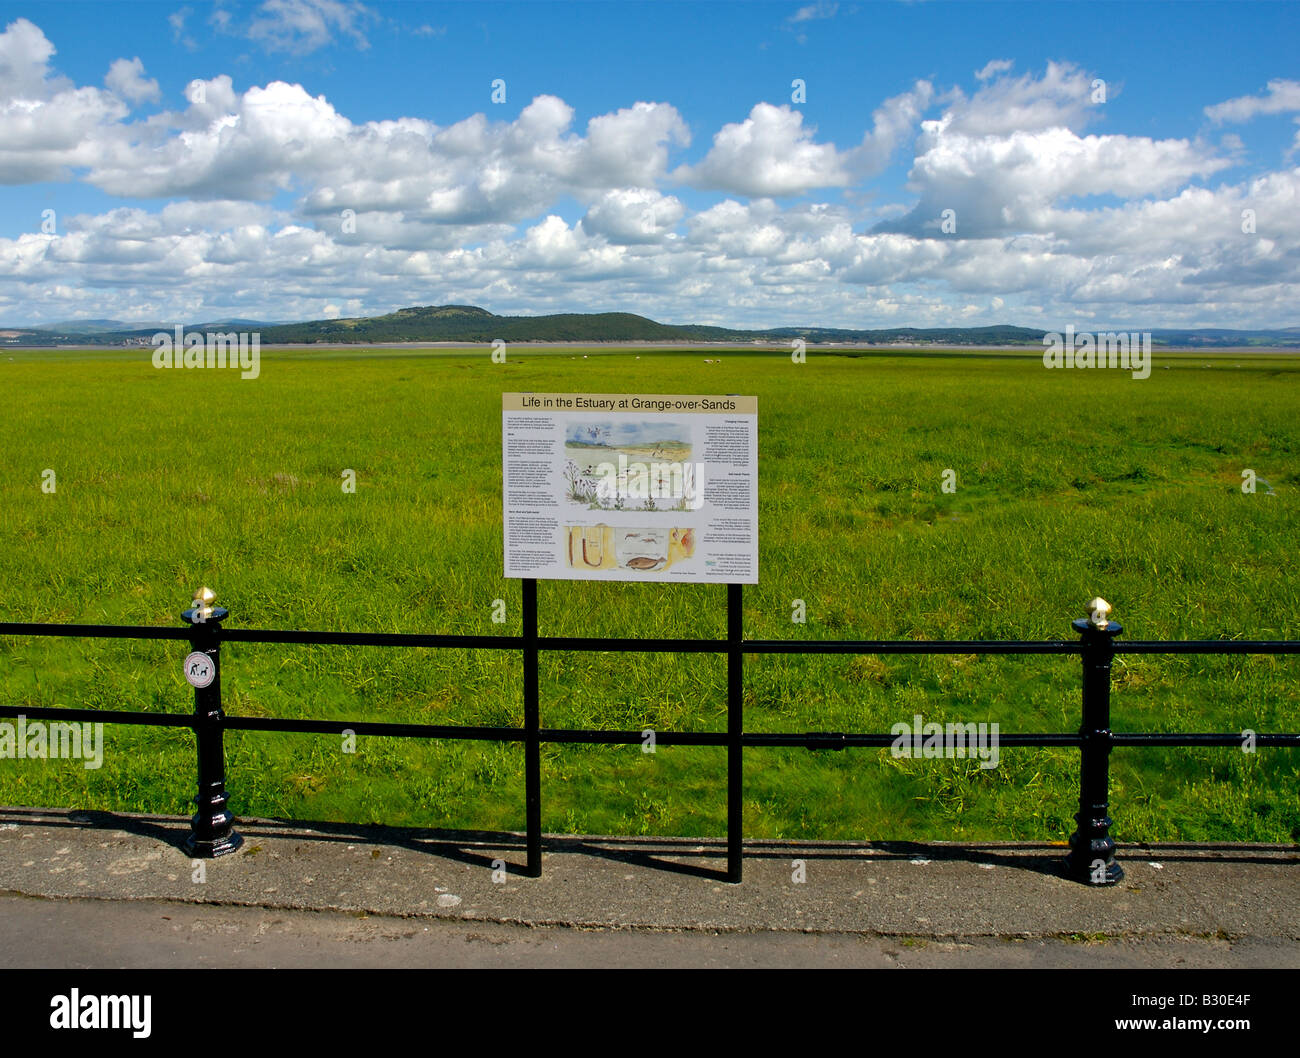 The promenade, Grange-over-Sands, looking out on a prairie of Spartina grass to morecambe Bay, Cumbria, England UK Stock Photo